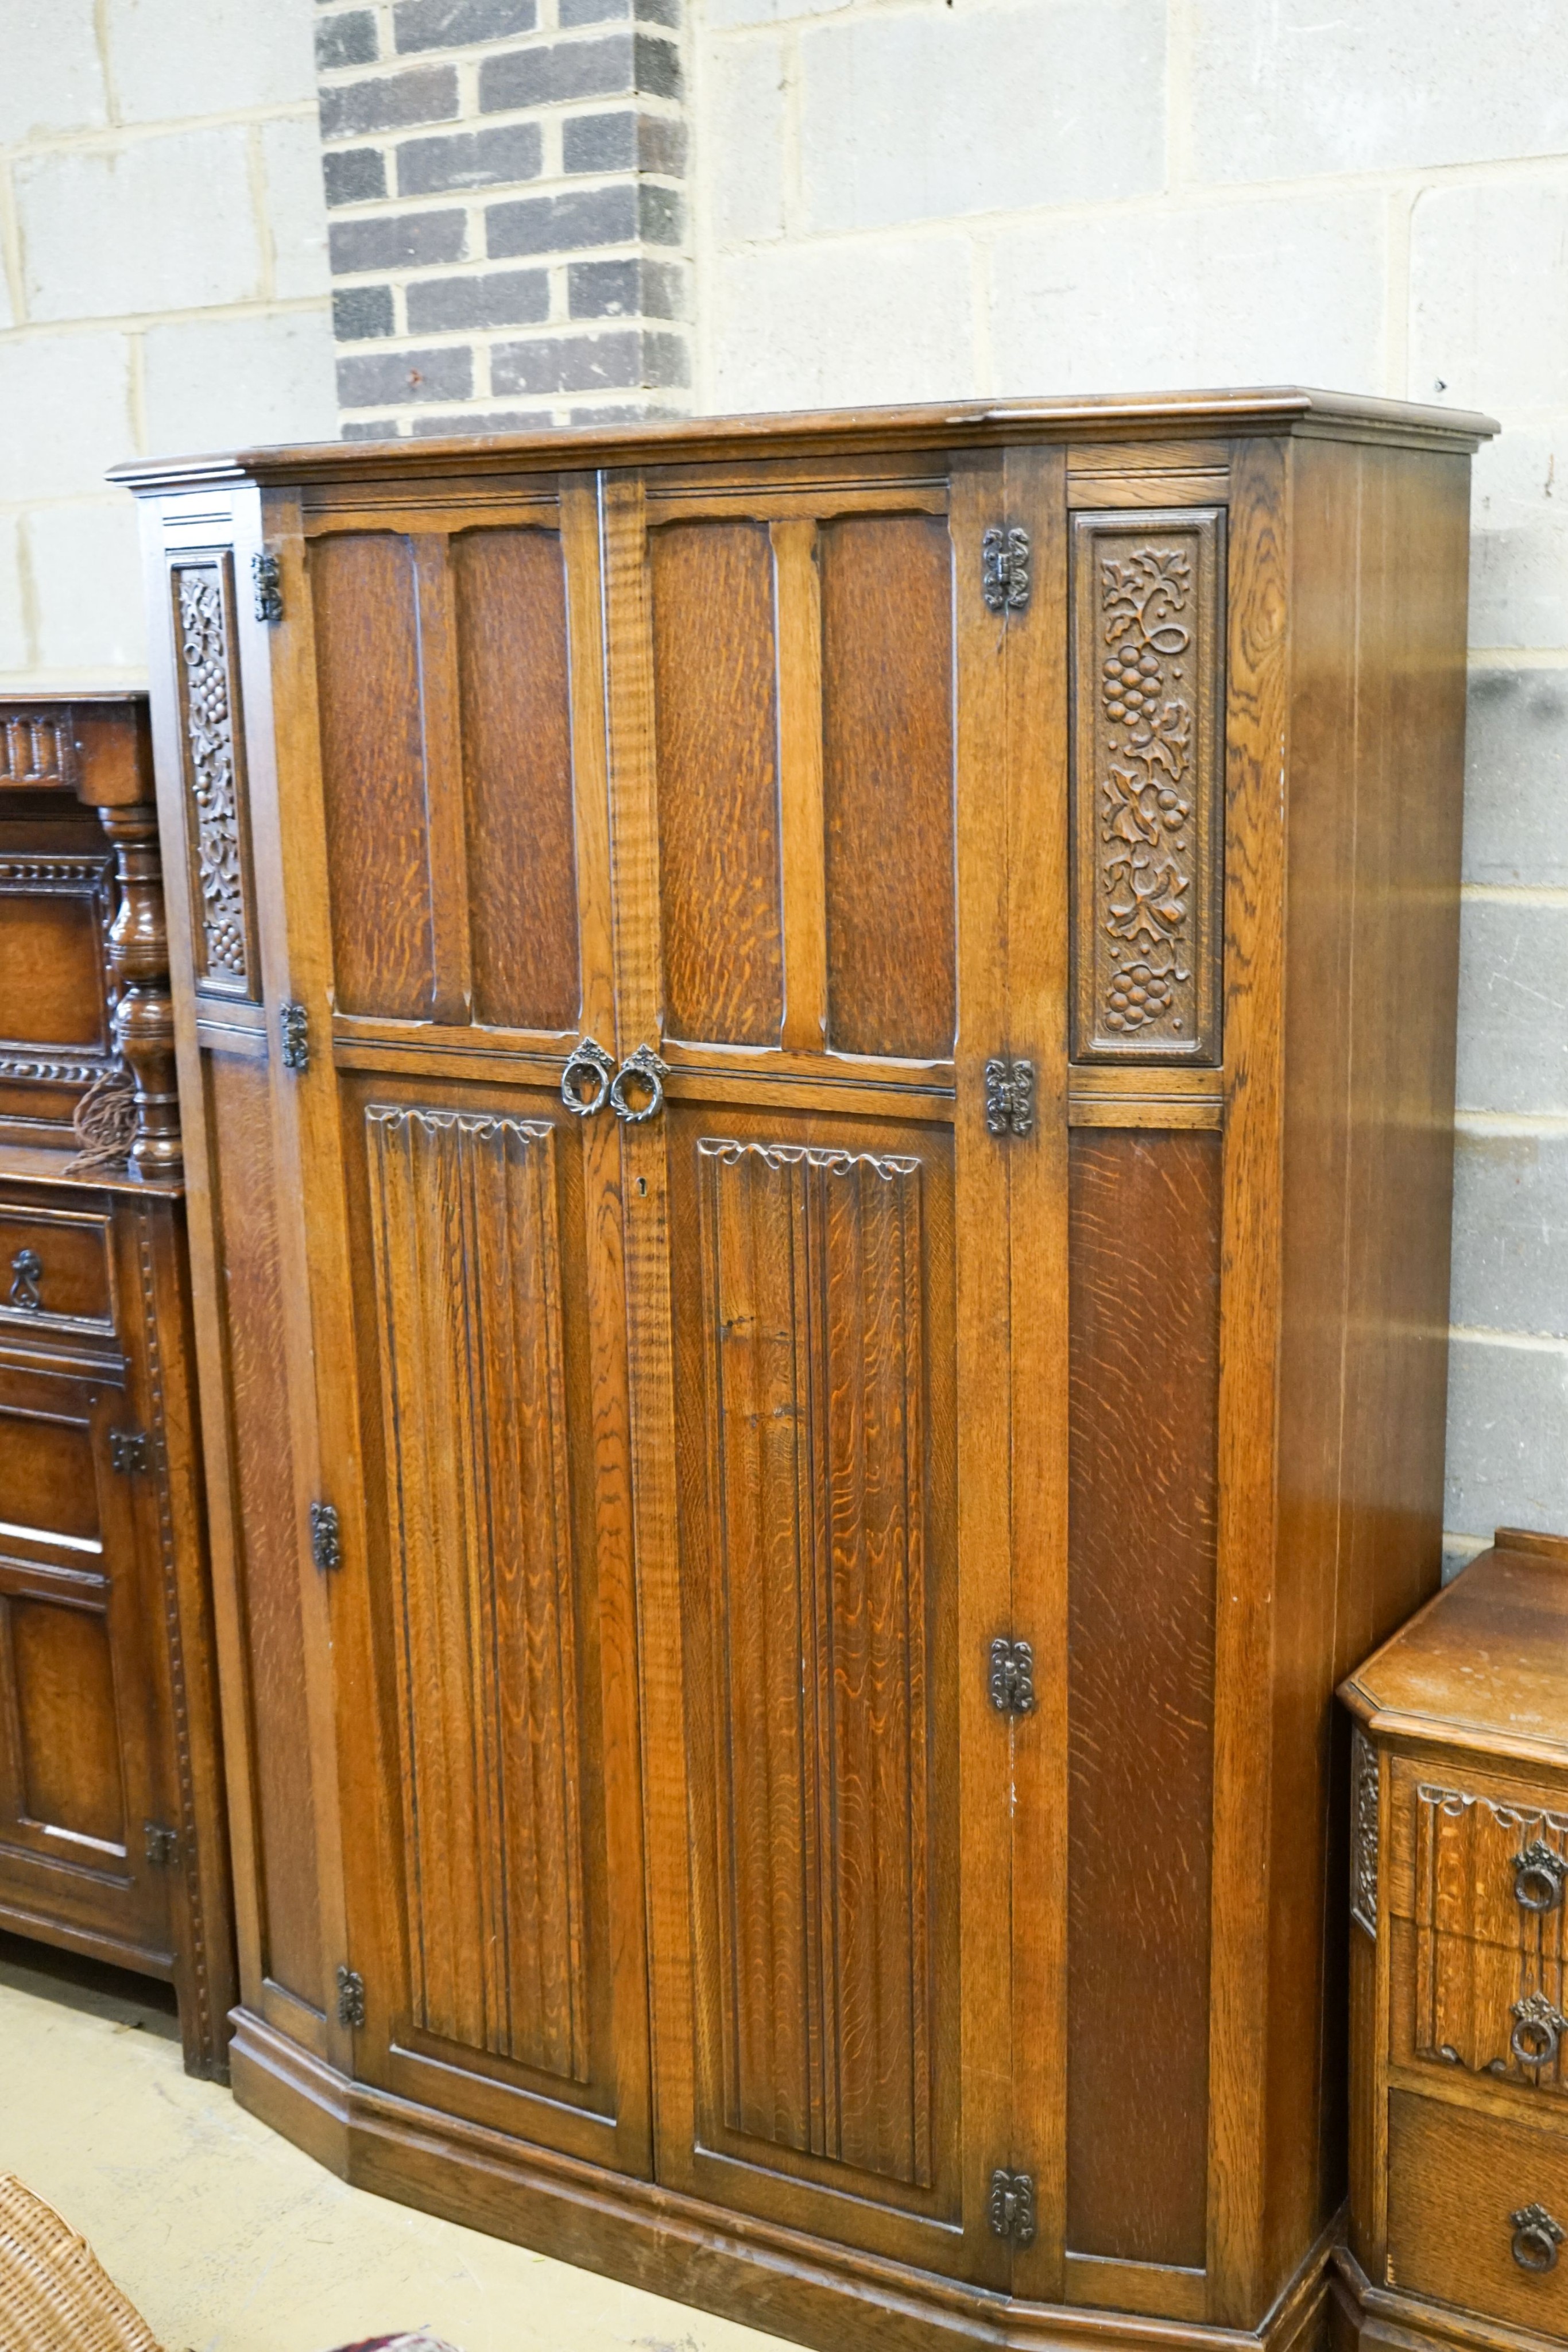 An early 20th century Jacobean revival linenfold moulded oak three piece bedroom suite, larger wardrobe length 128cm, depth 58cm, height 183cm